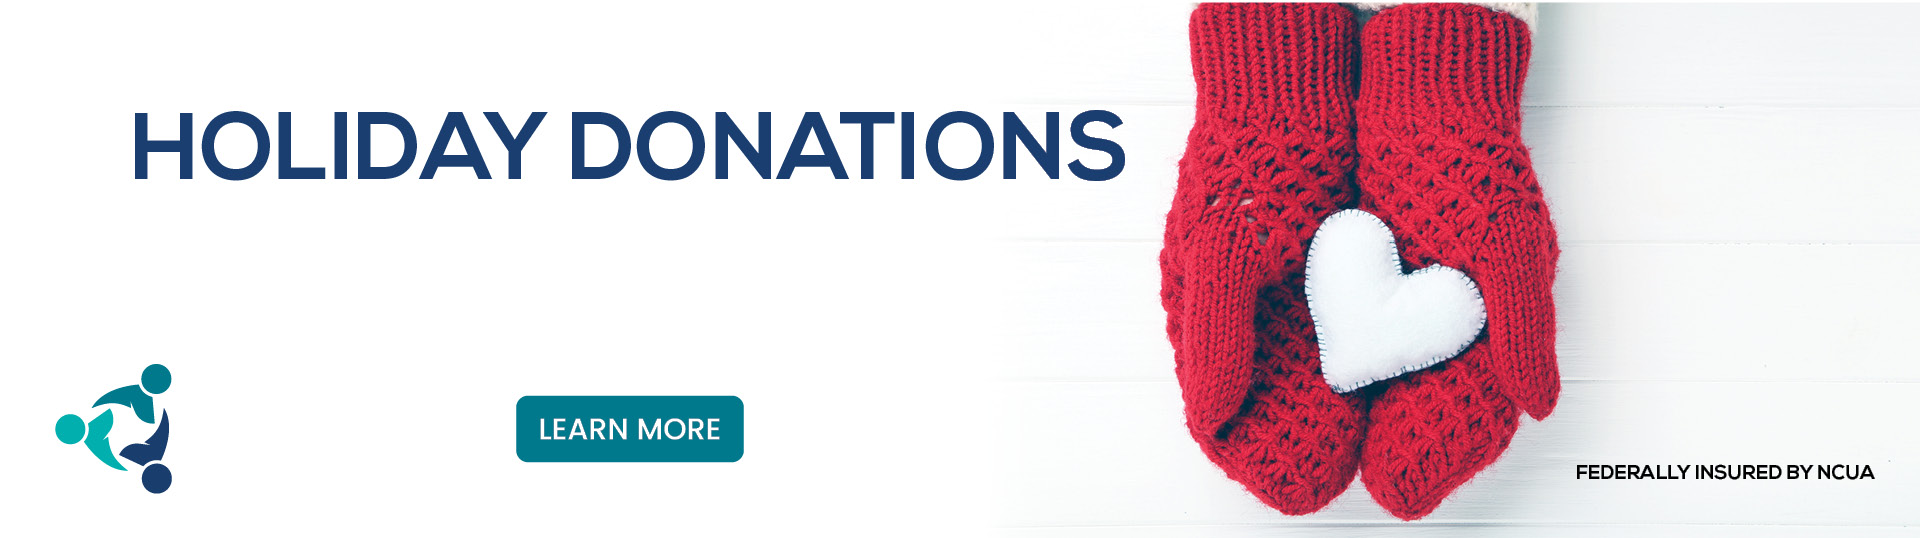 donation banner home page